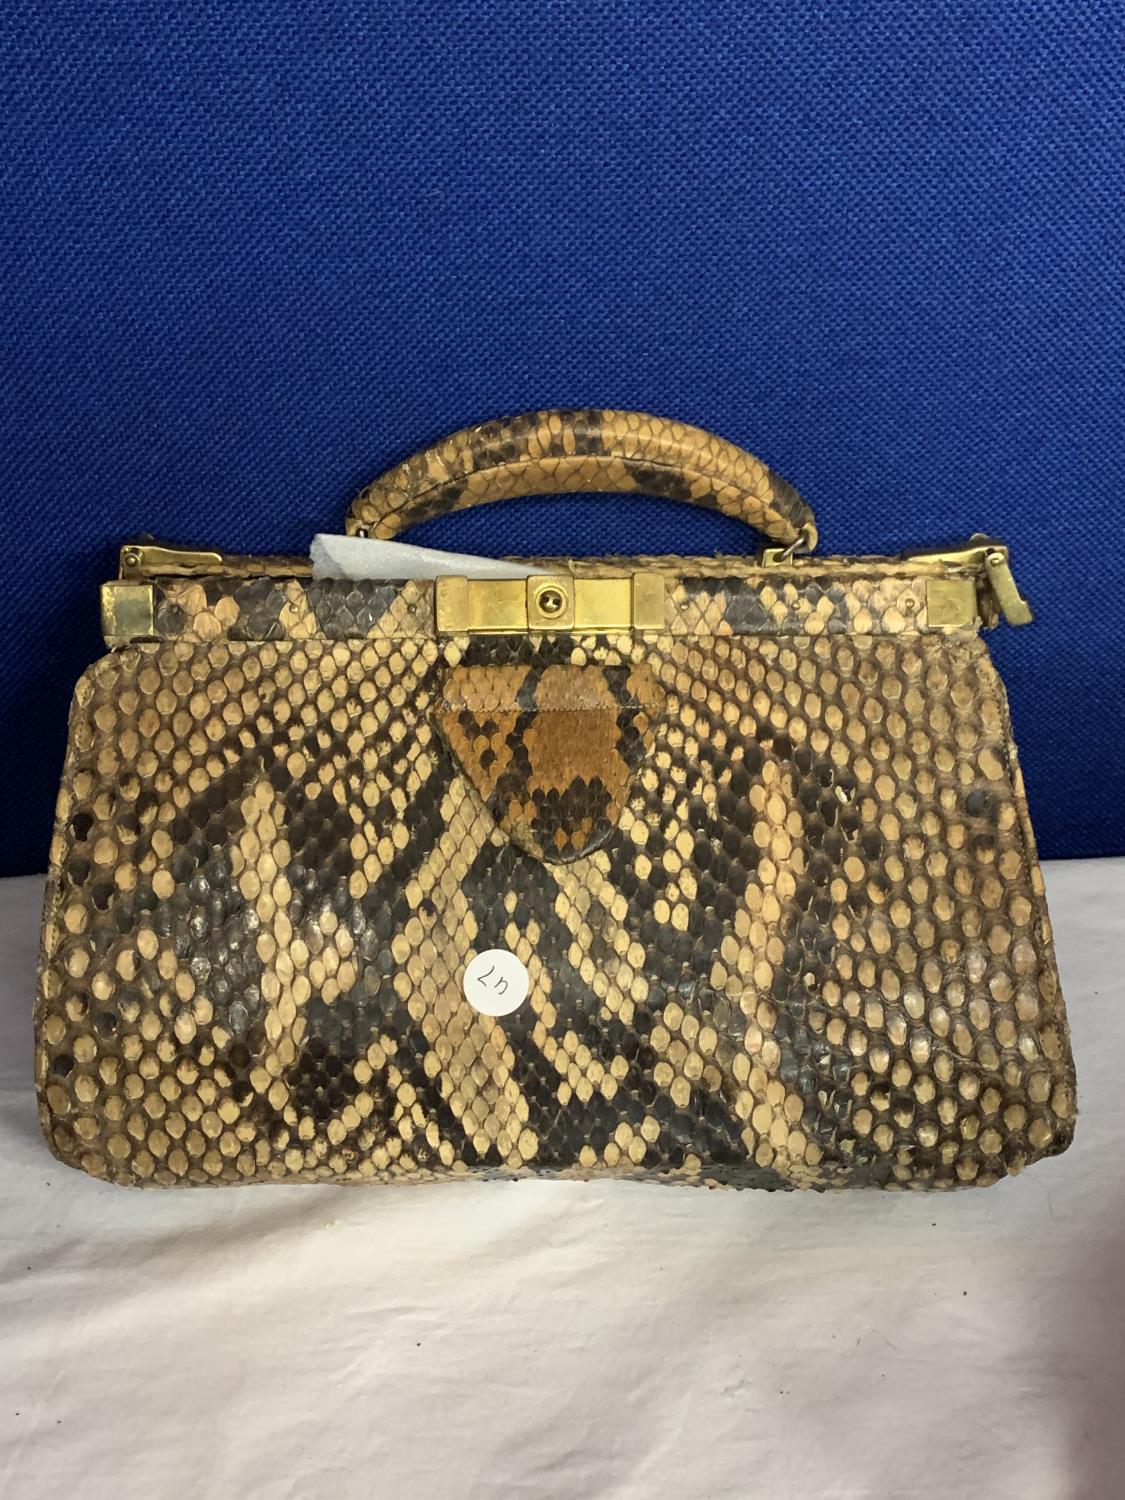 TWO VINTAGE HANDBAGS ONE CROCODILE AND THE OTHER SNAKESKIN - Image 4 of 5